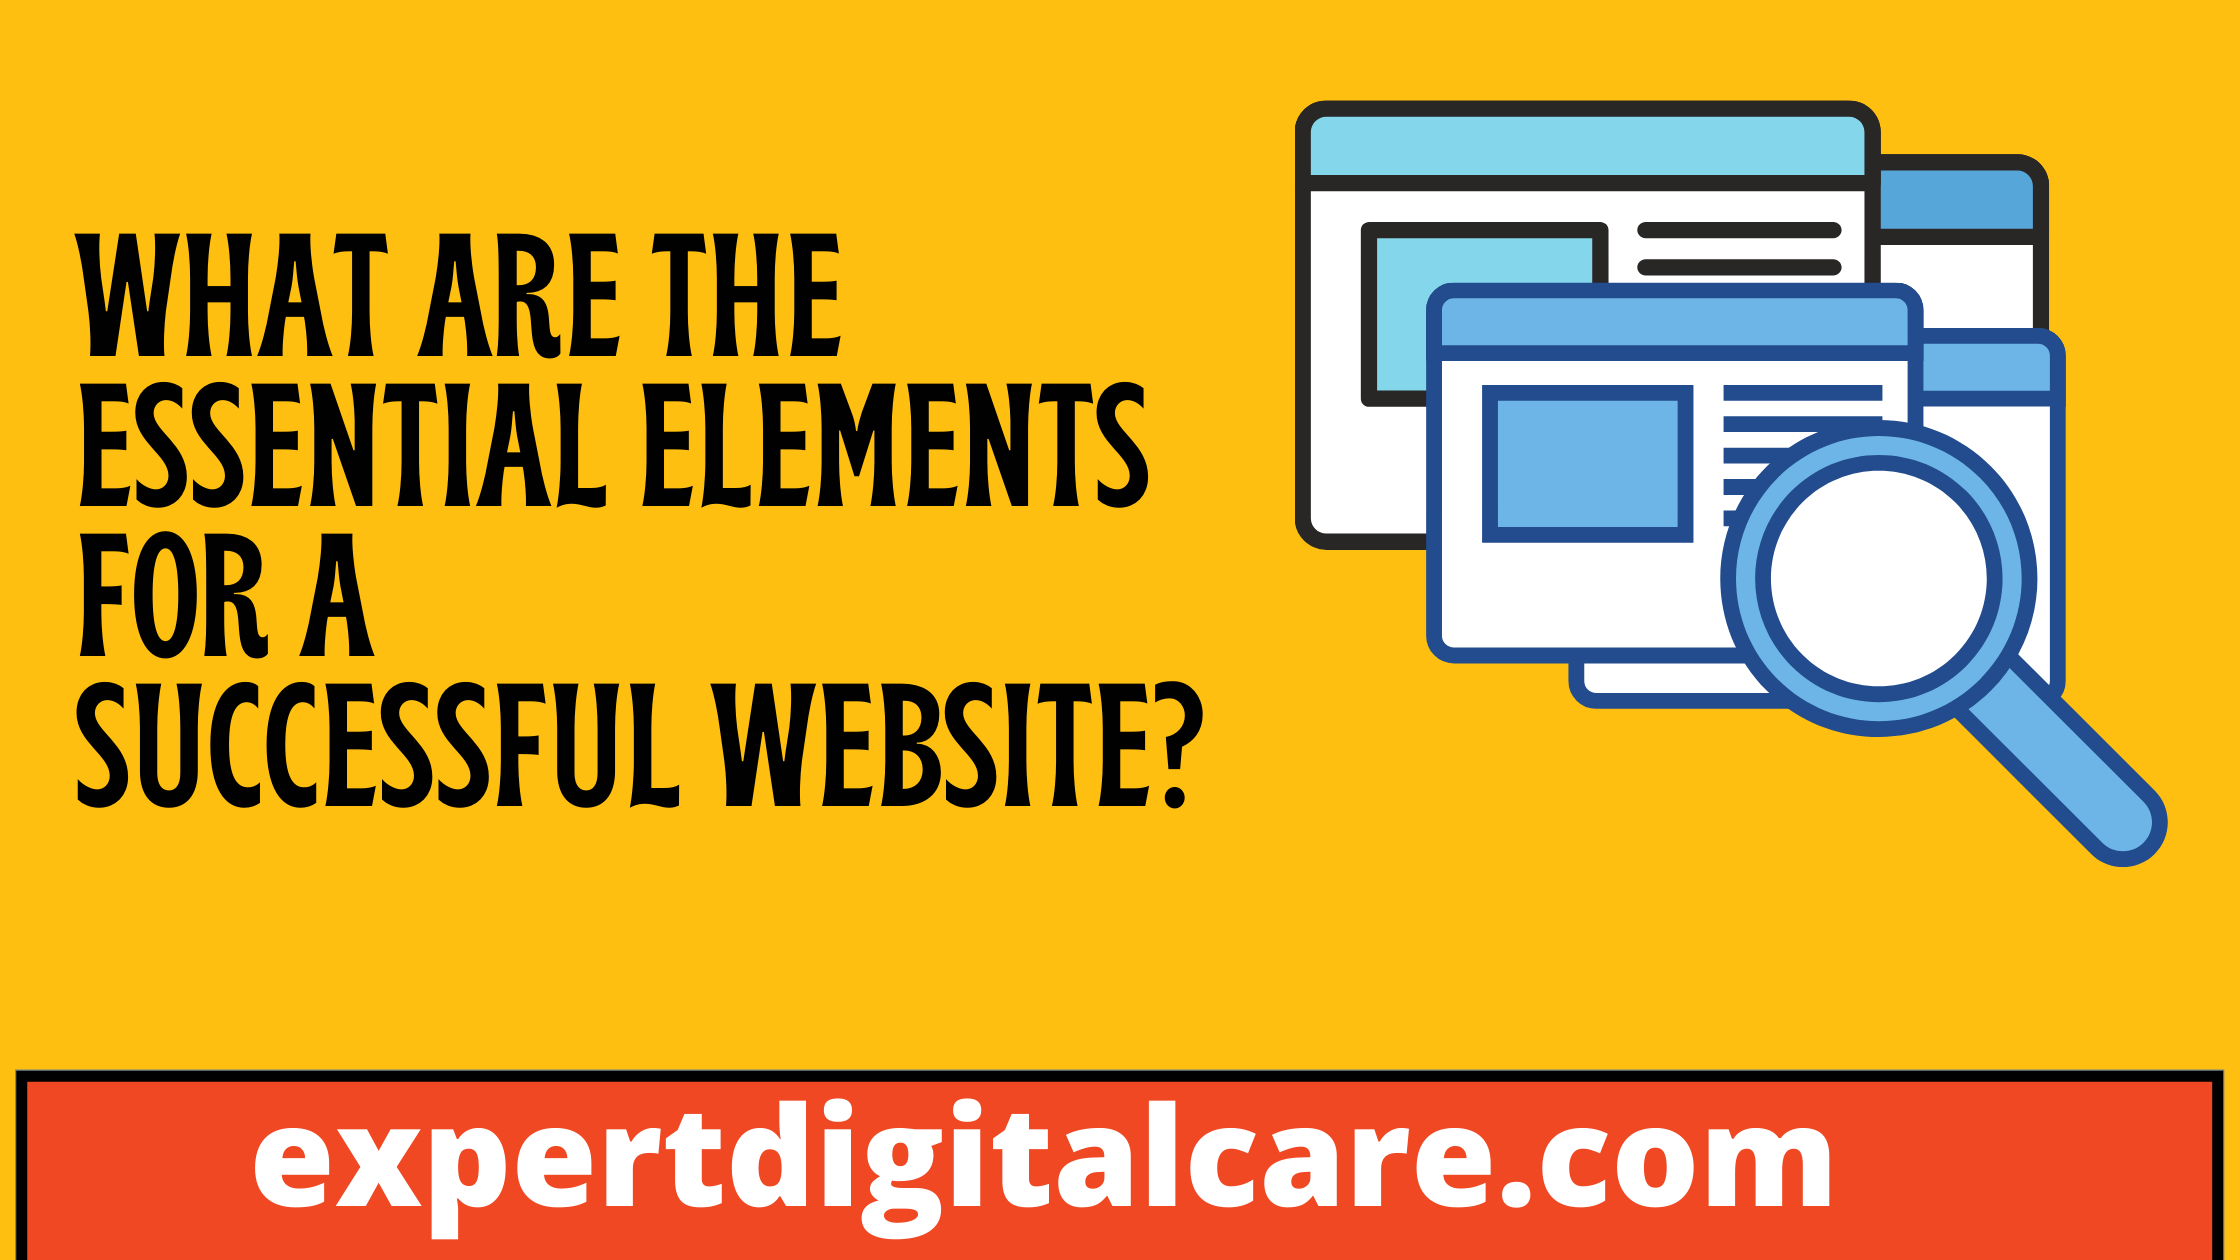 What are the essential elements for a successful website?